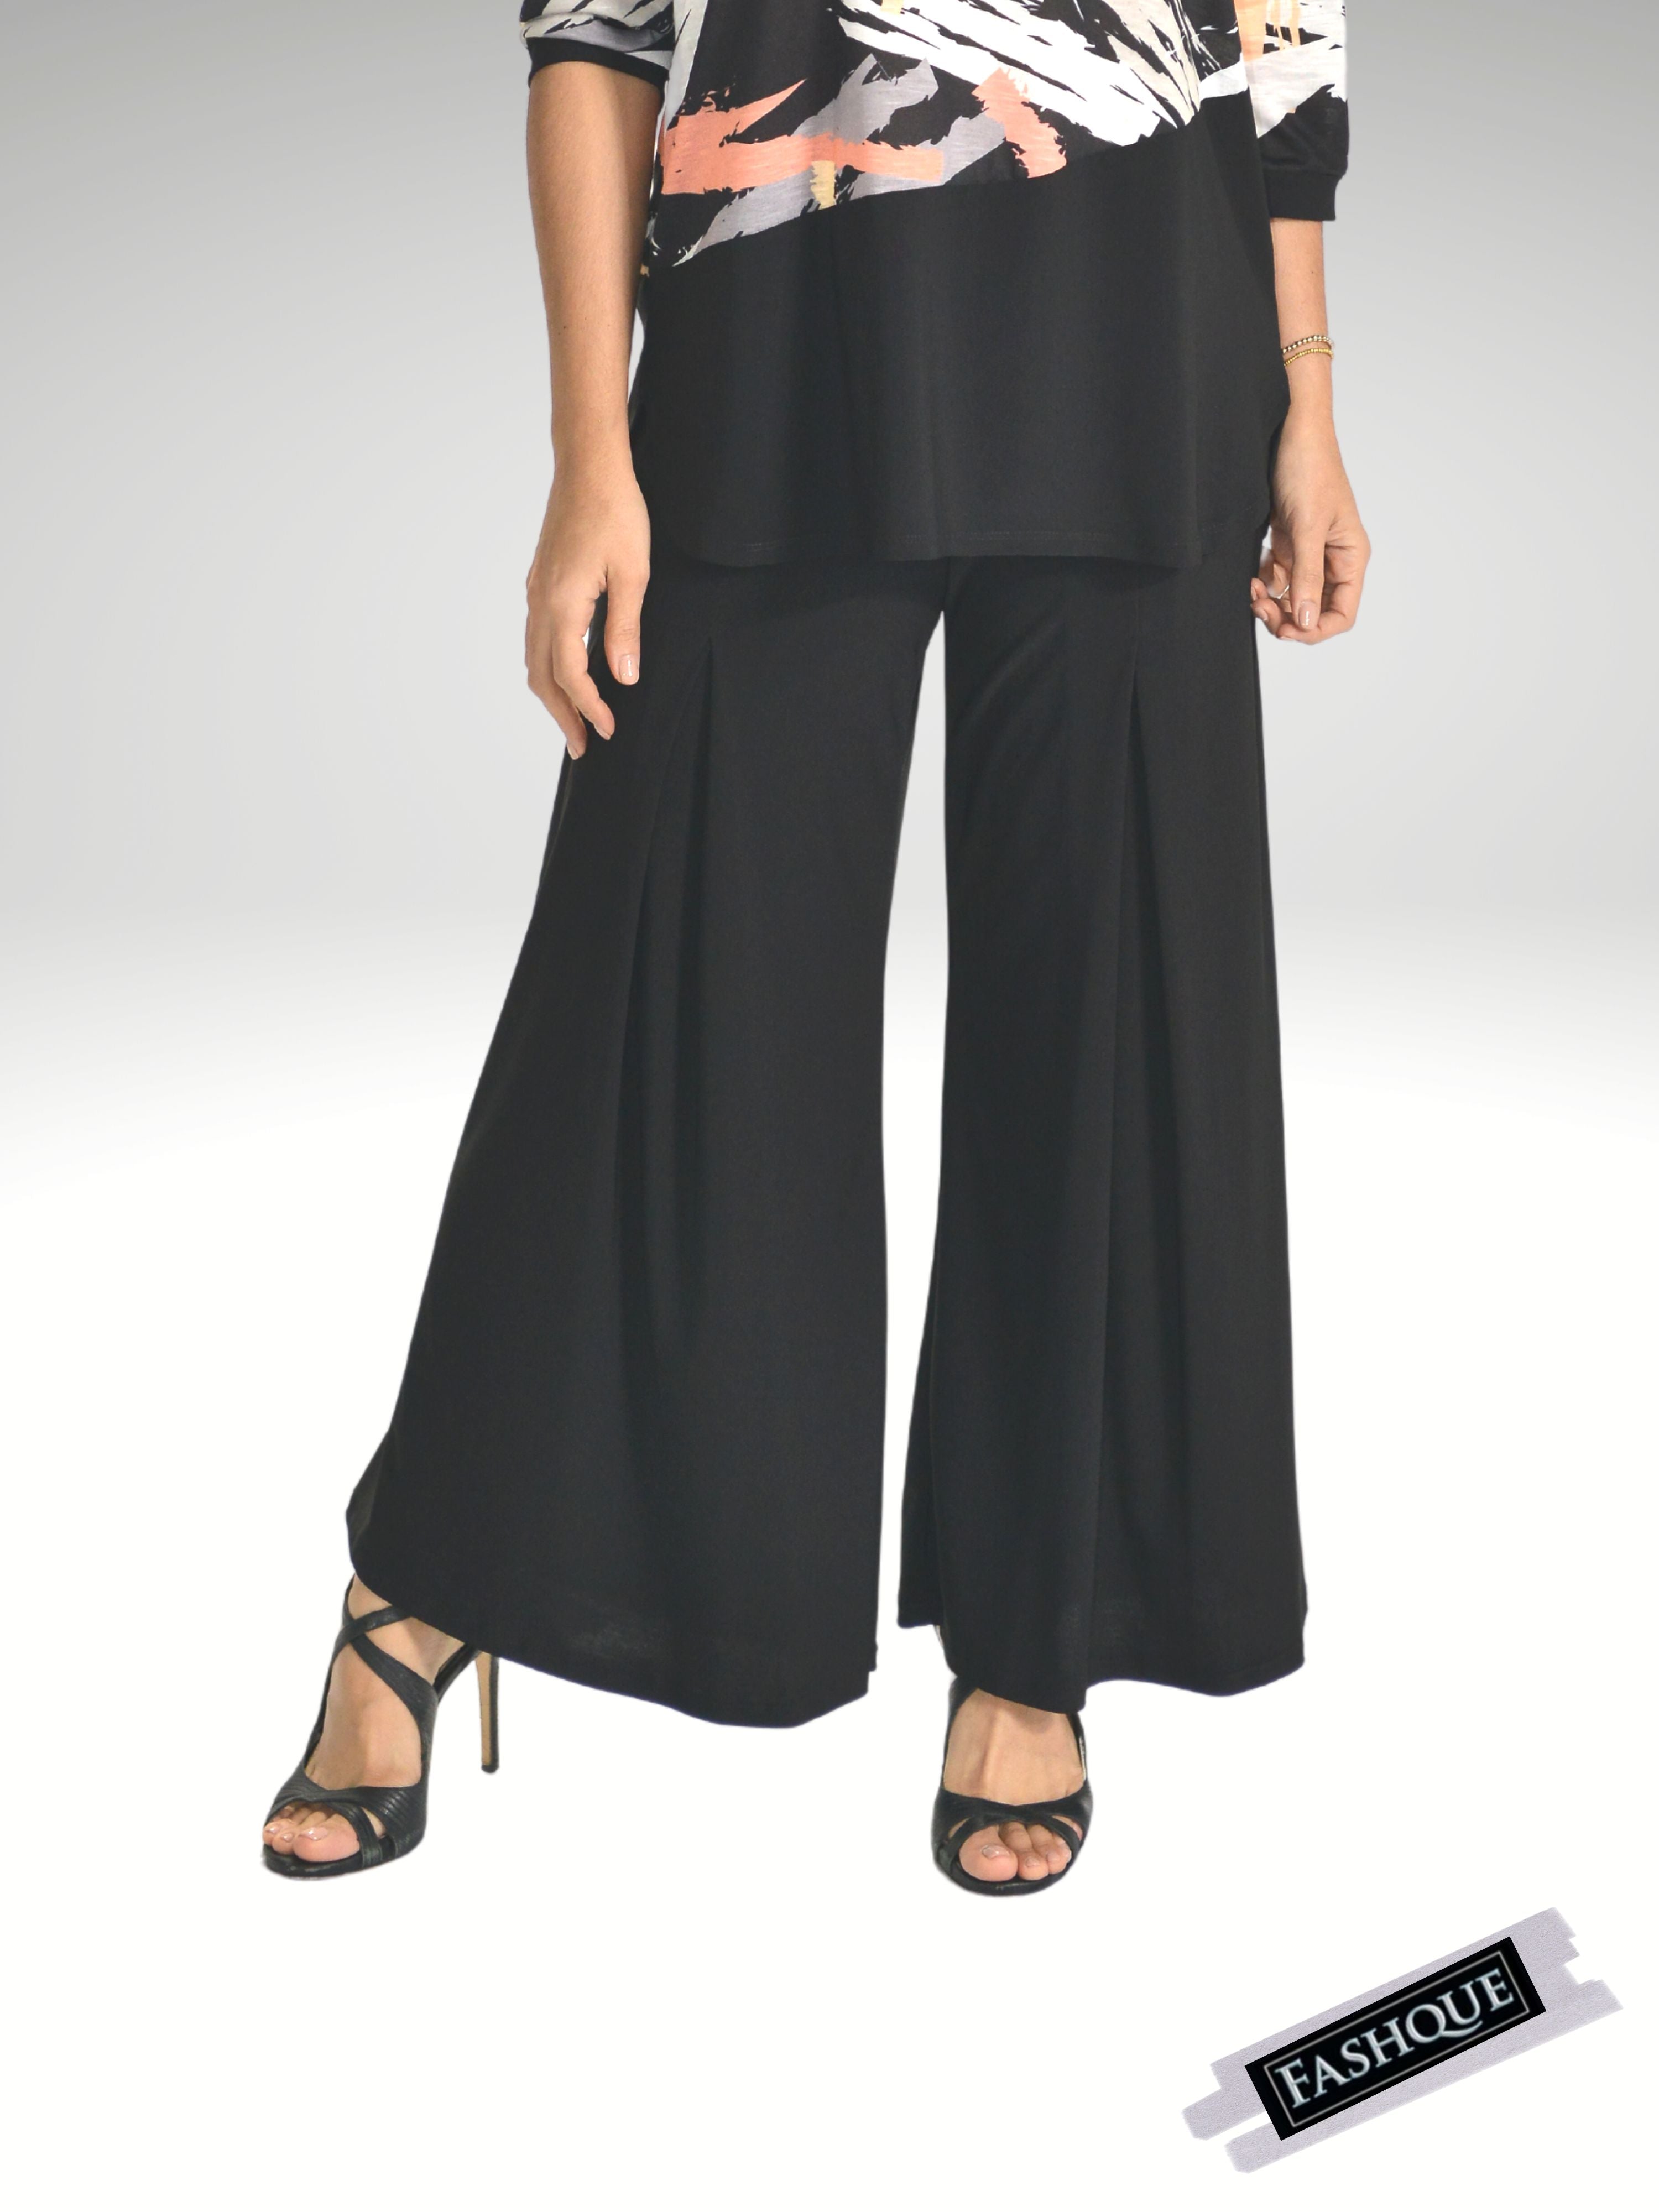 FASHQUE - Pull On Pleated Front Gaucho - P031